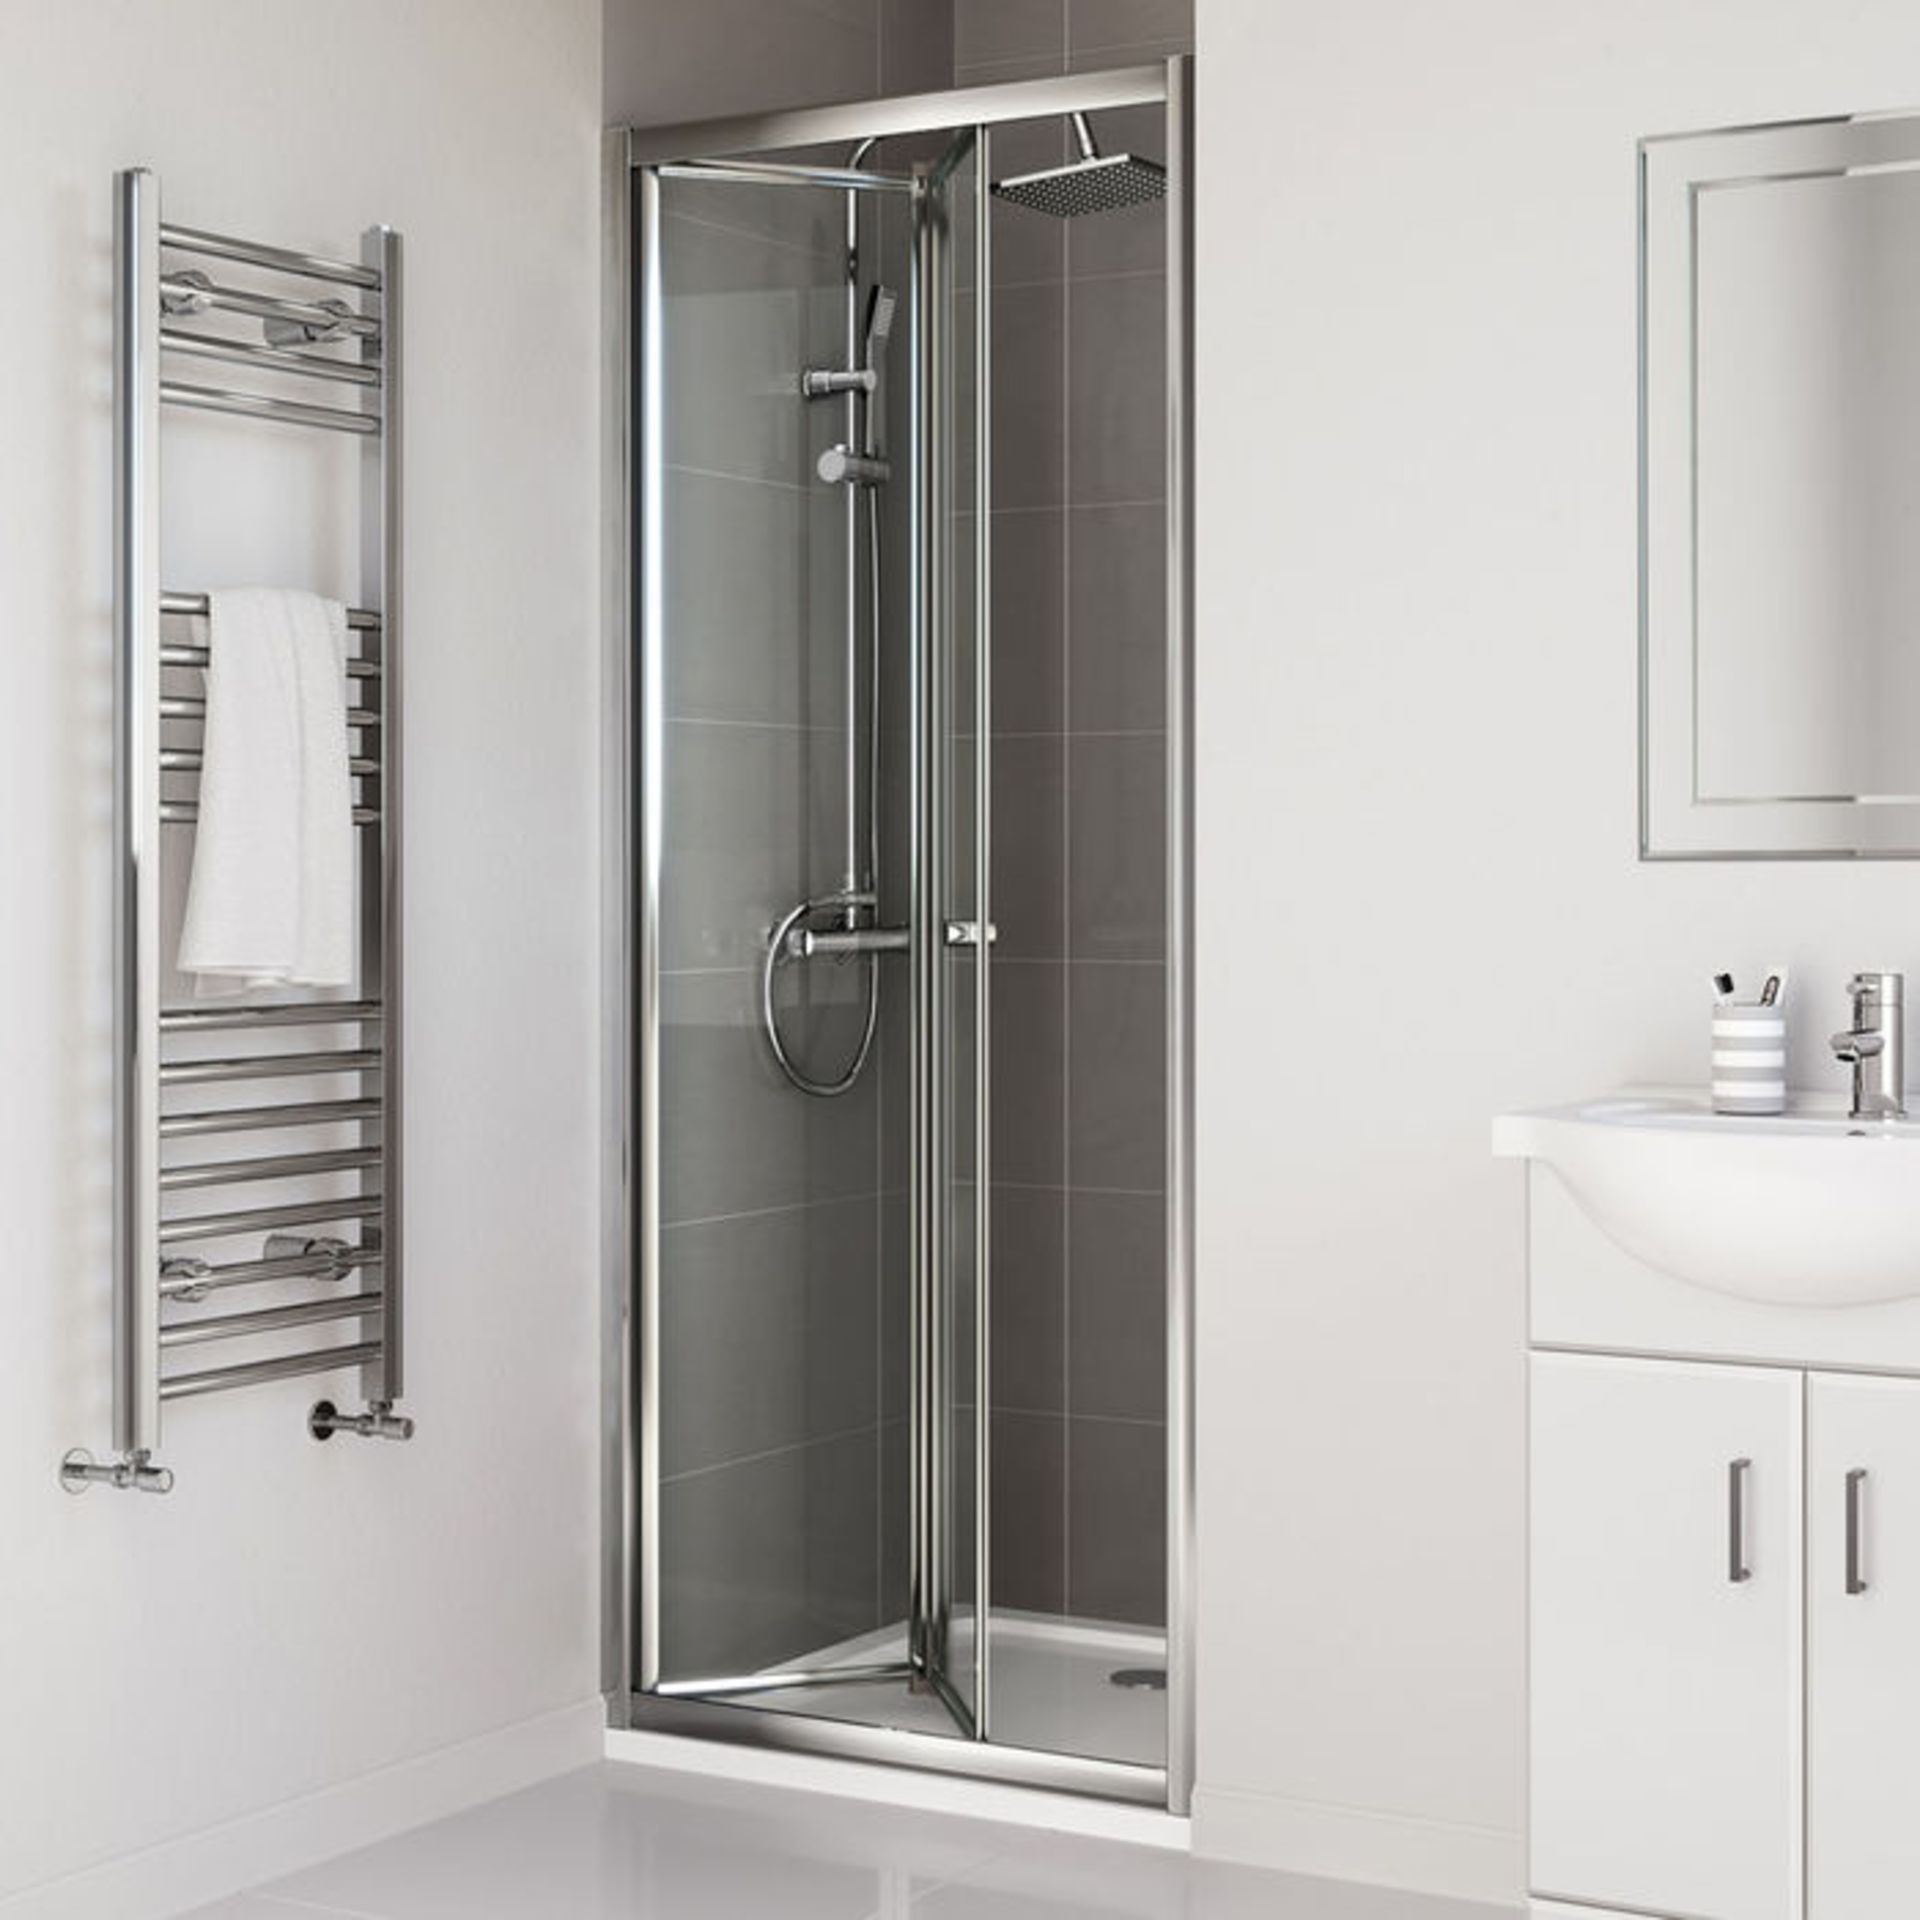 (XM12) 800mm - Elements Bi Fold Shower Door. RRP £299.99. 4mm Safety Glass Fully waterproof tested - Image 2 of 5